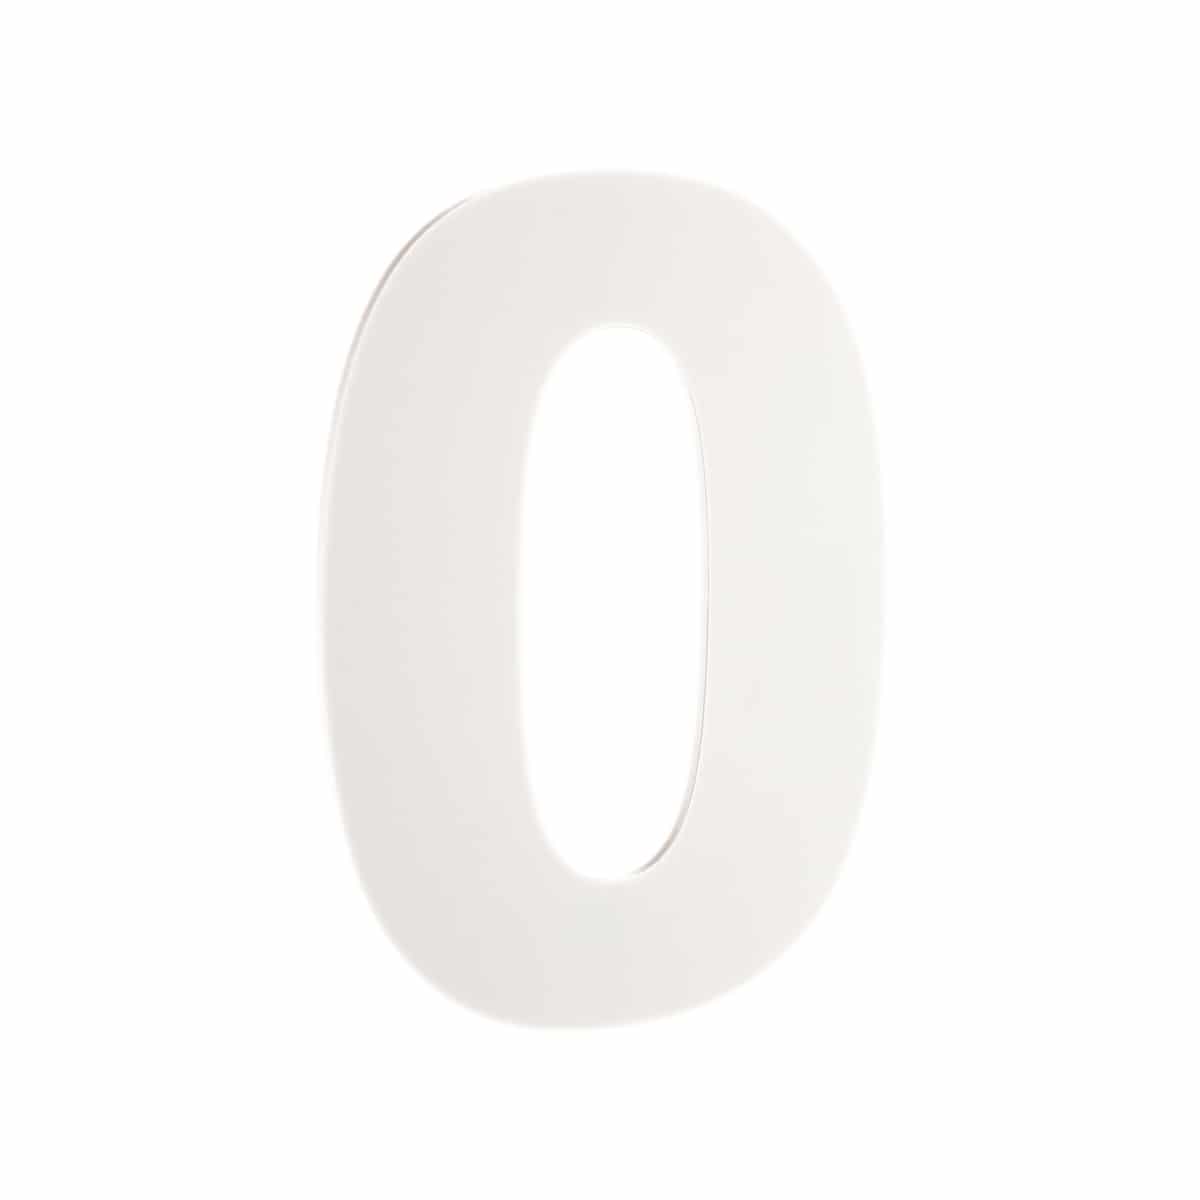 number-0-white-perspex-40mm